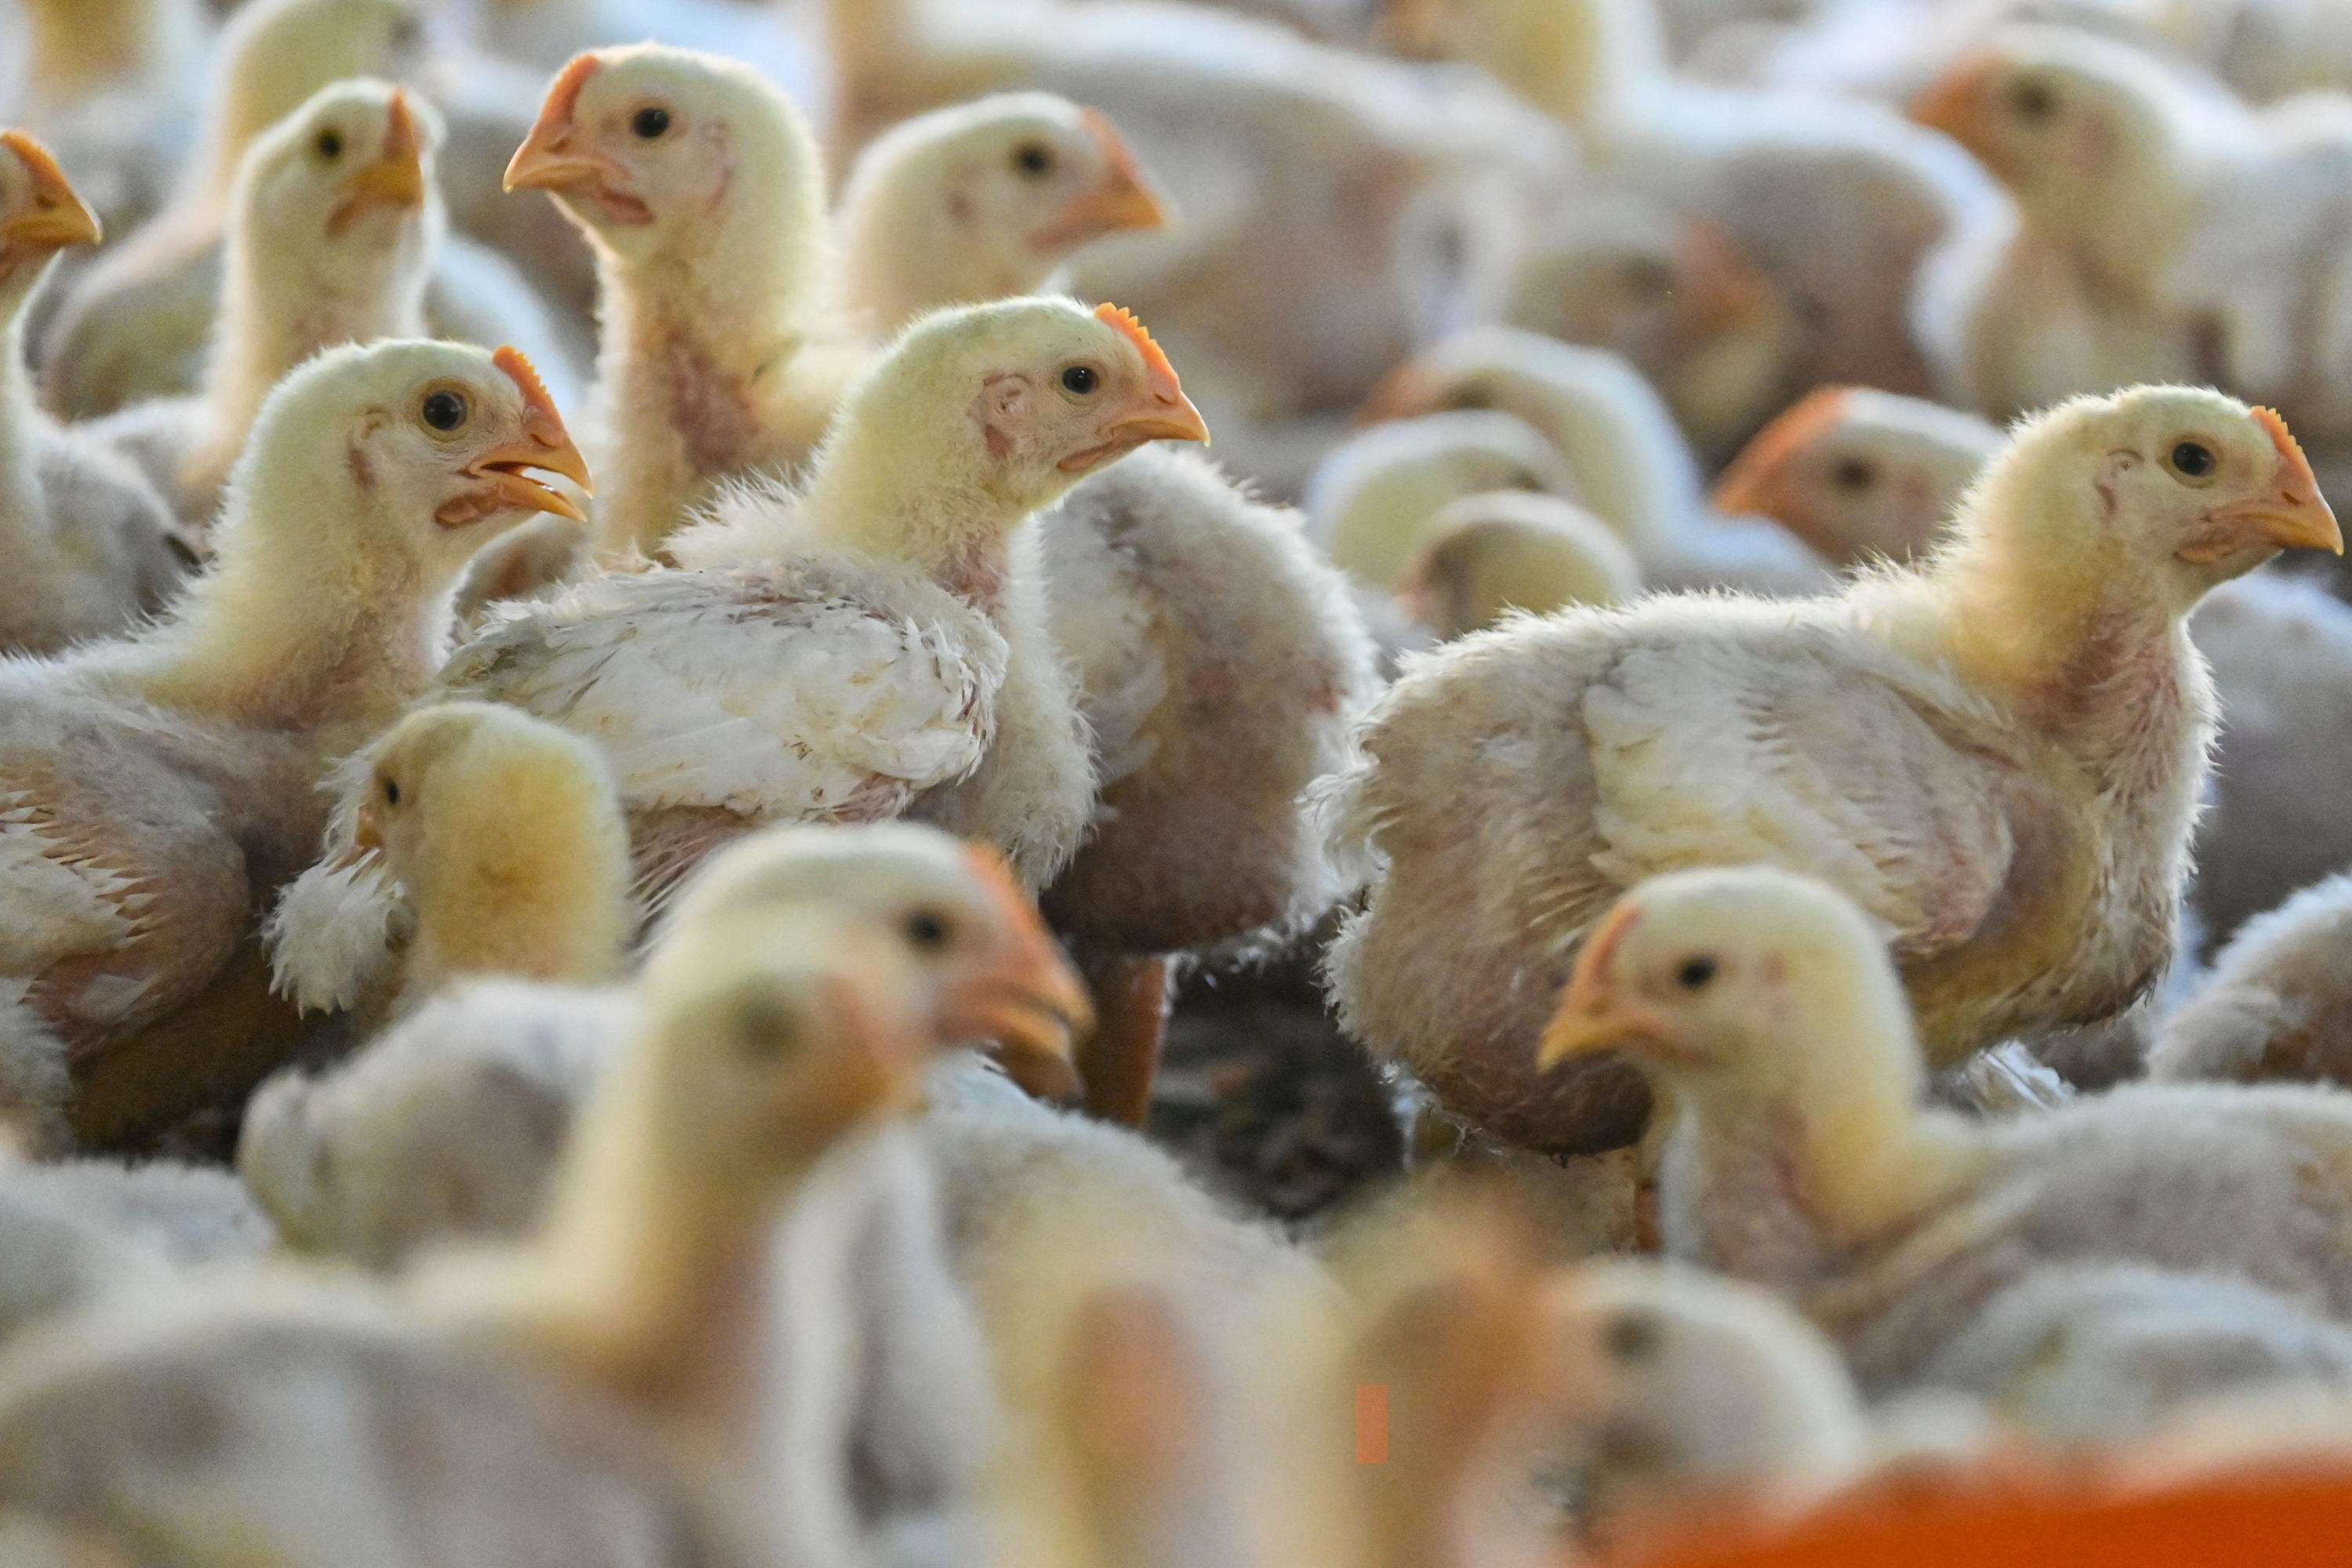 Bird flu sparks warning for pet owners: “Take great caution”